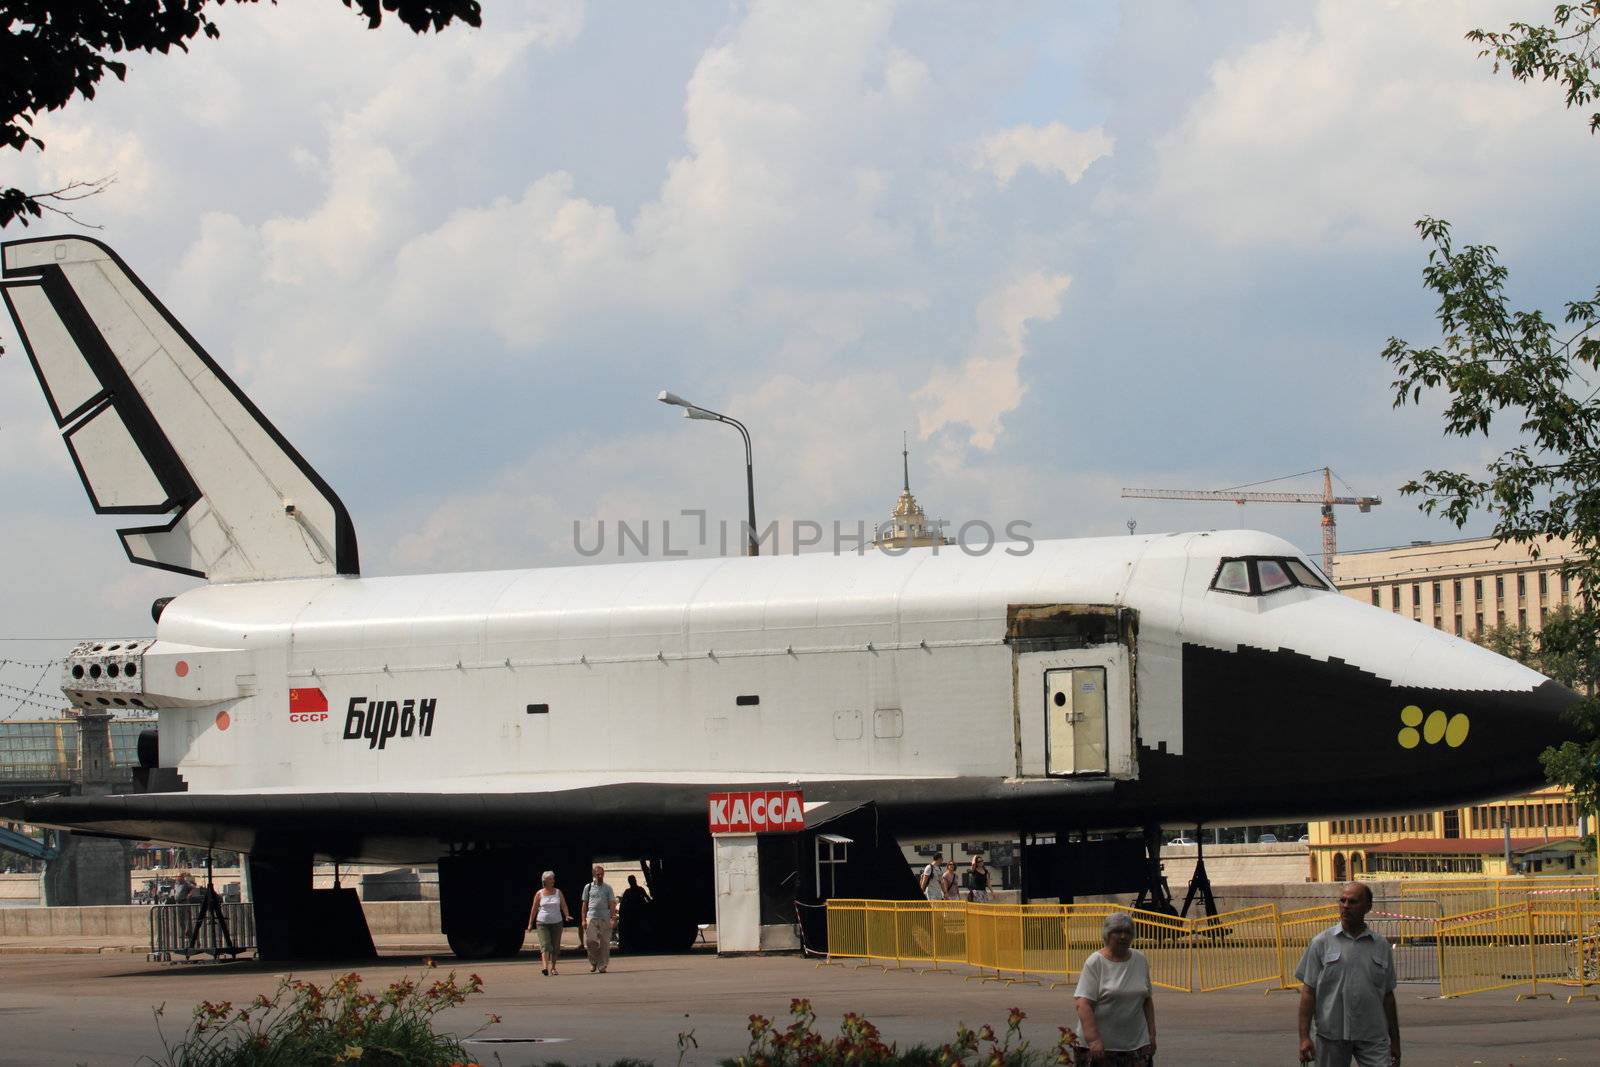 spacecraft "Buran" against the background of an amusement park vacation